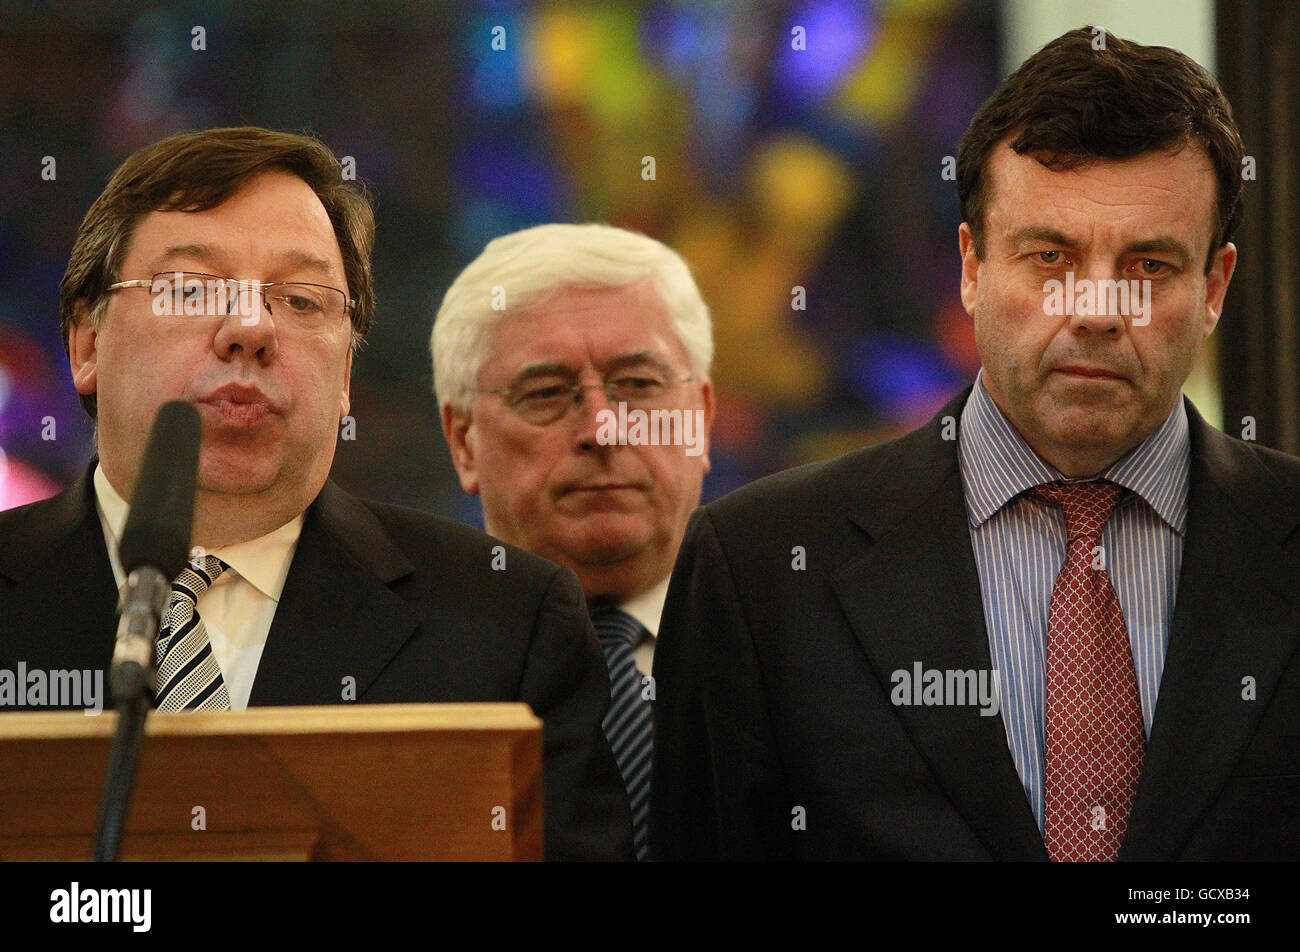 Irish Taoiseach Brian Cowen, with Finance Minster Brian Lenihan (right), giving a statement to the waiting media on the steps of Government Buildings in Dublin, where refused to bow to public and political pressure for a general election saying serving the country's interests came above party politics. Stock Photo